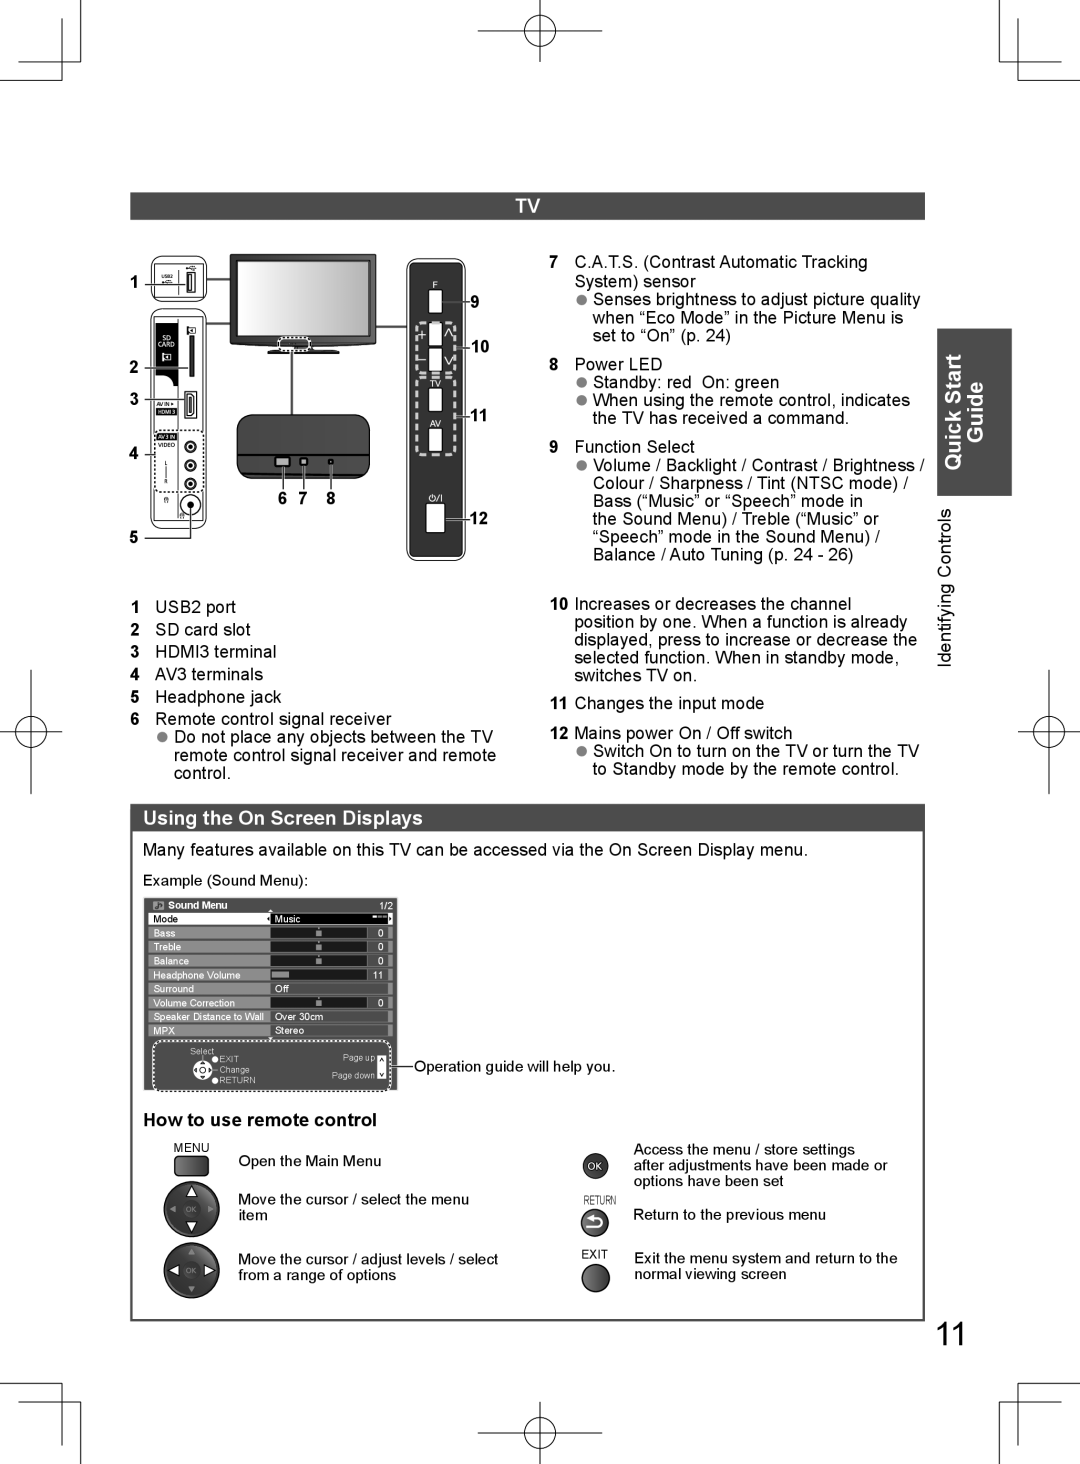 Panasonic TH-L32D25M manual Guide, Using the On Screen Displays, How to use remote control 